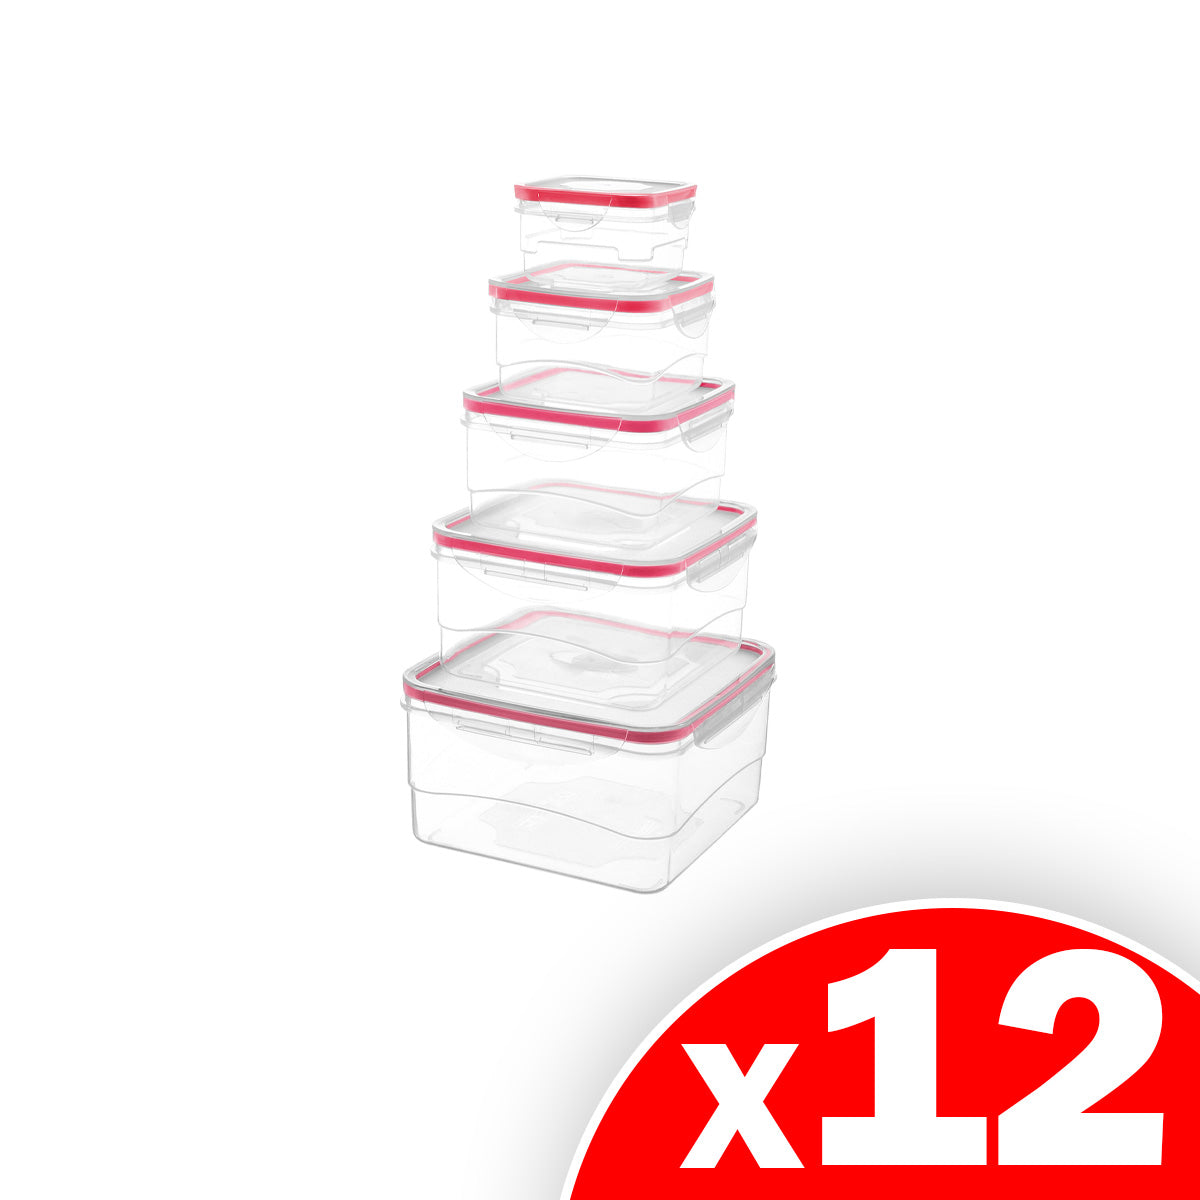 10-Piece Square Locktops Container Set: 120ml, 400ml, 740ml, 1290ml, 2060ml, Red, 12 Pack